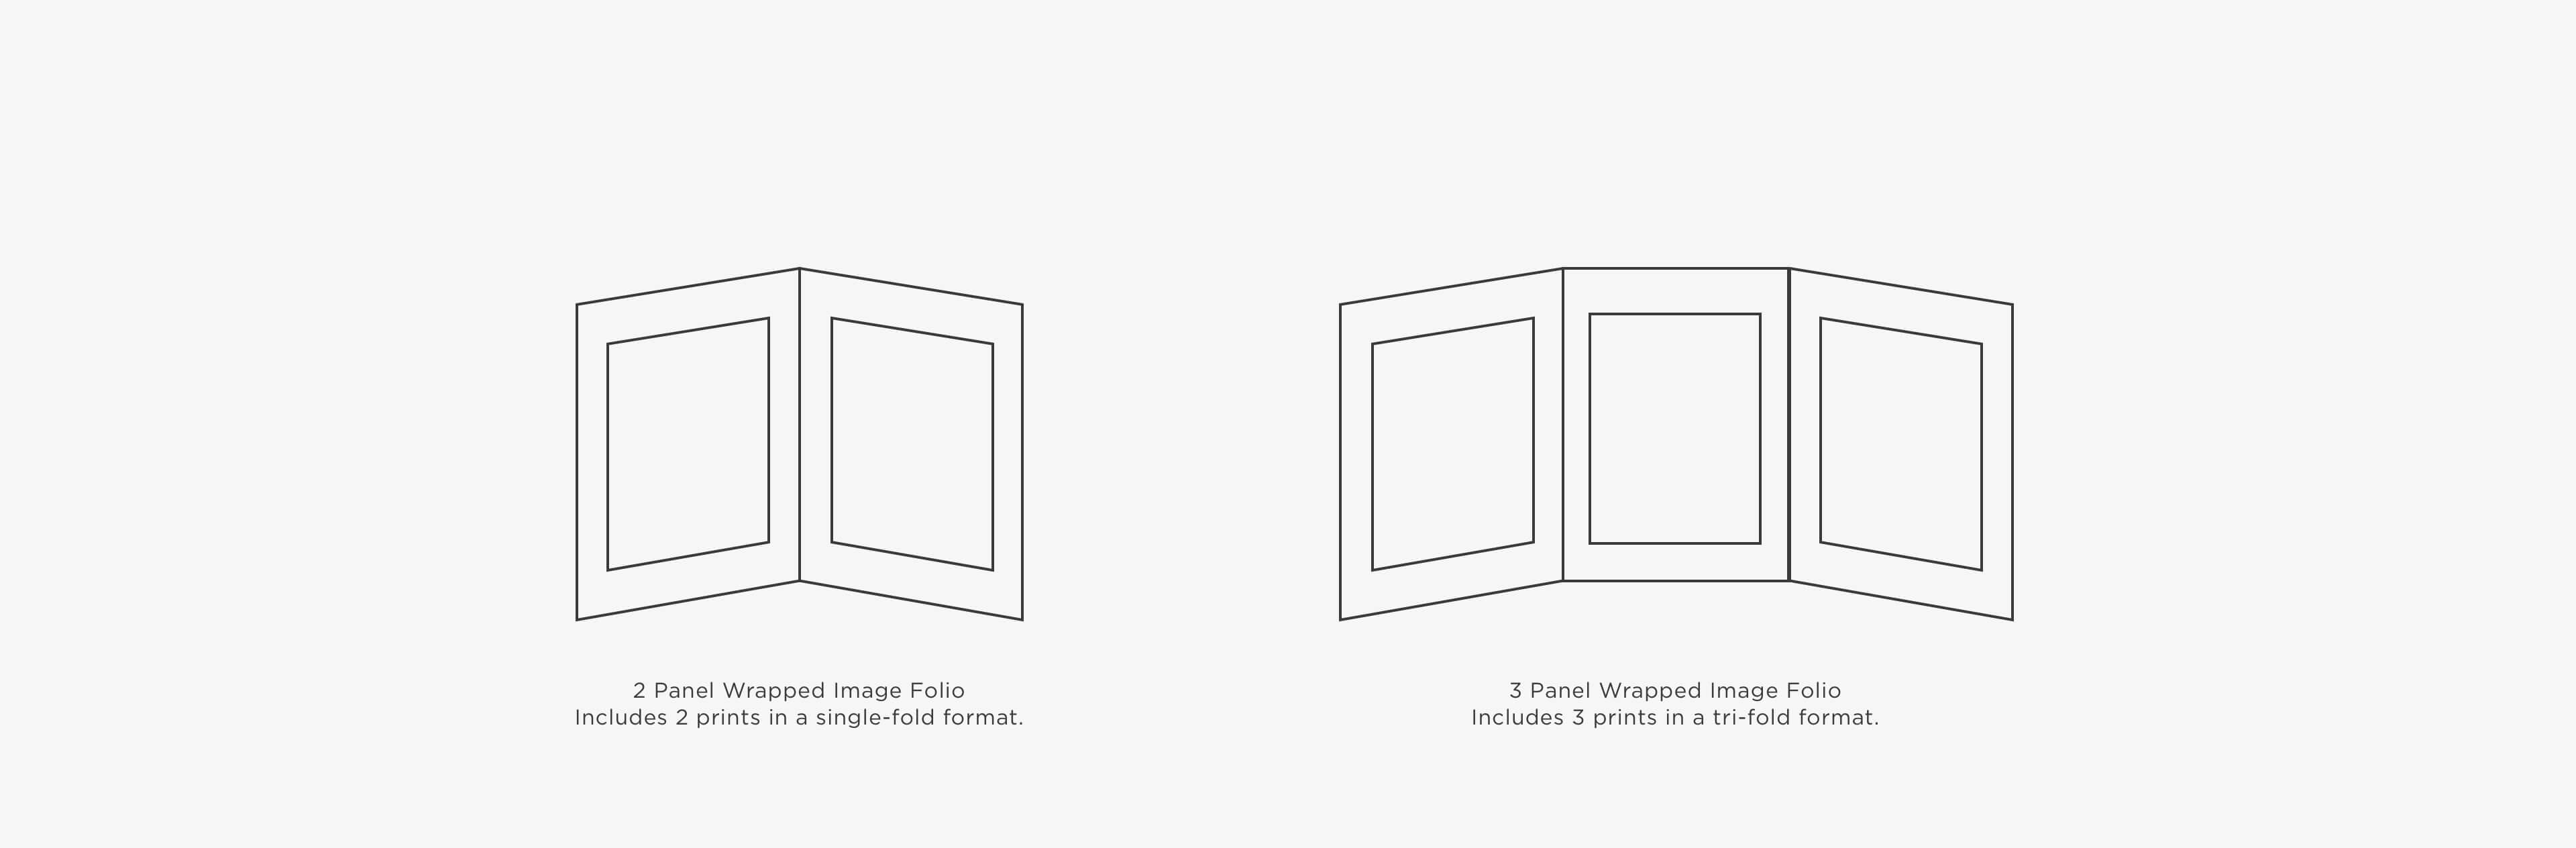 graphic showing panel formats for wrapped image folios